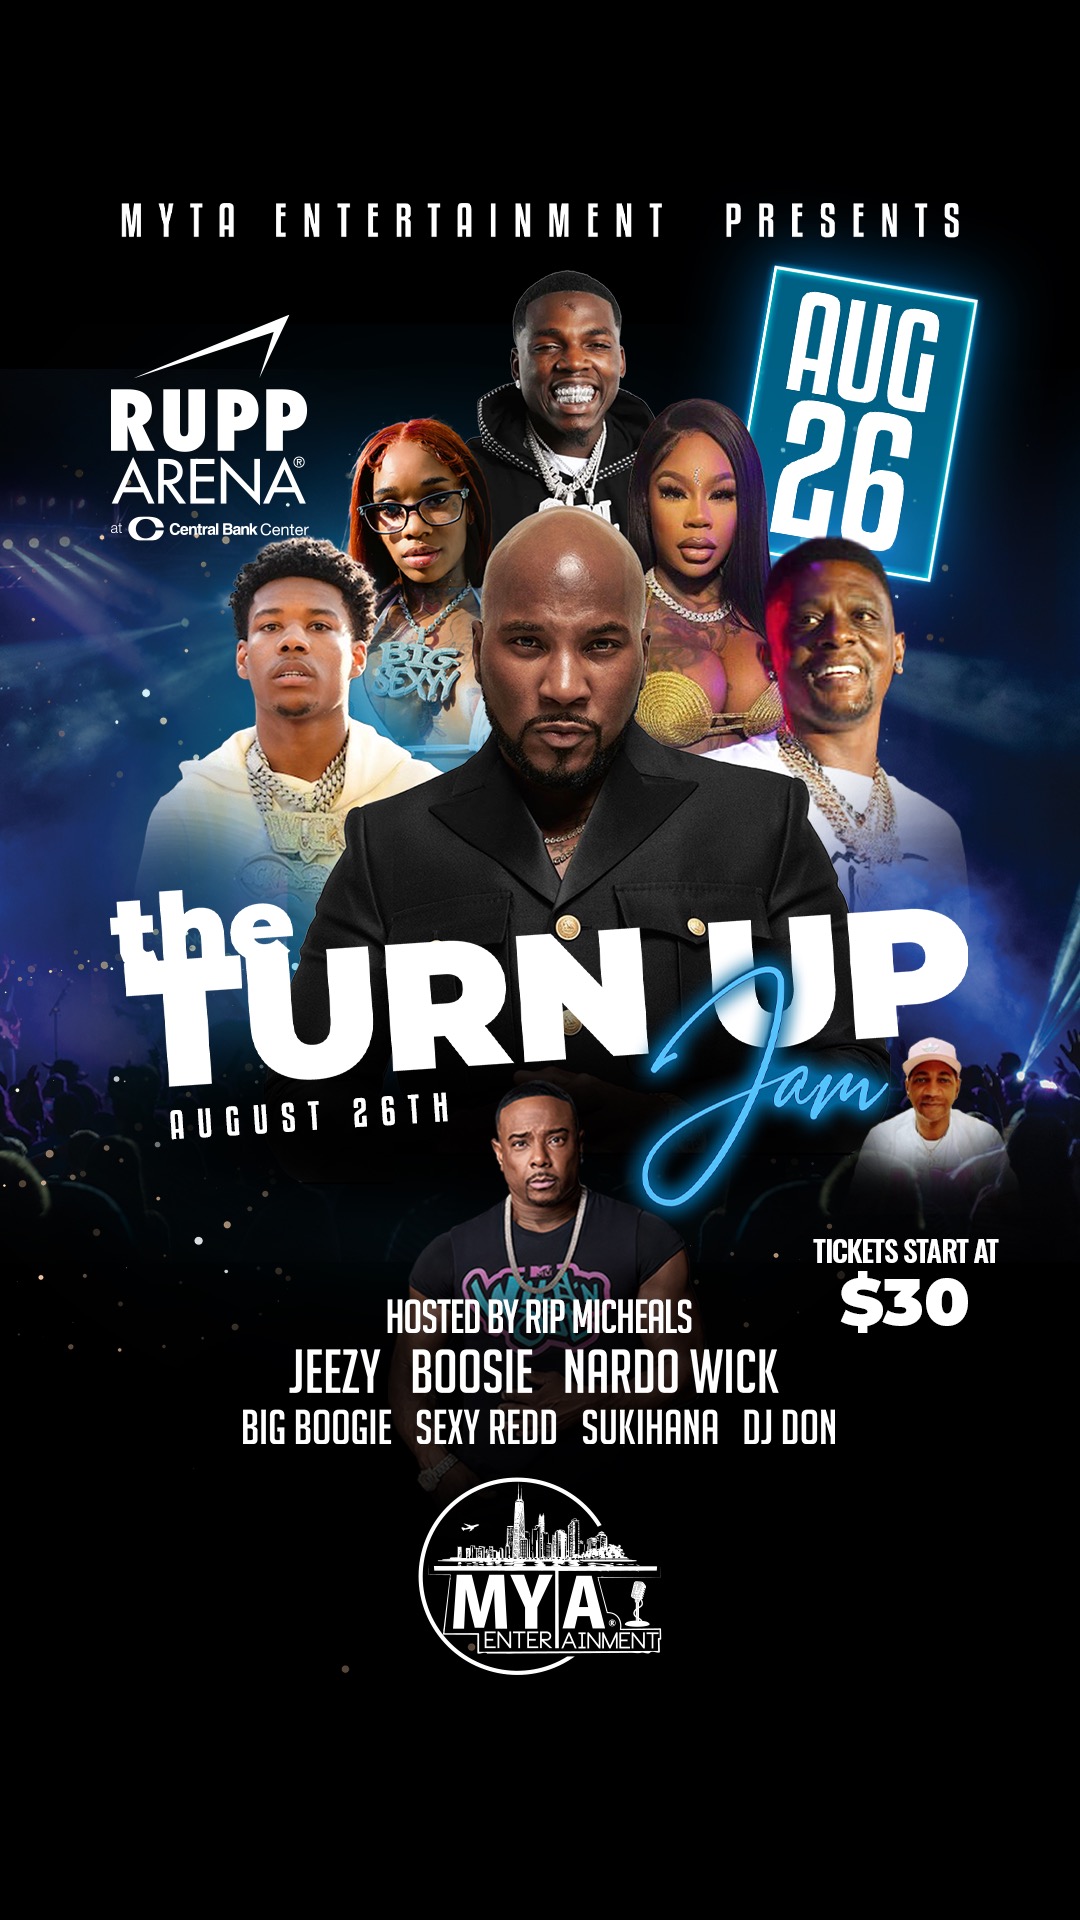 <h1 class="tribe-events-single-event-title">The Turn Up Jam</h1>